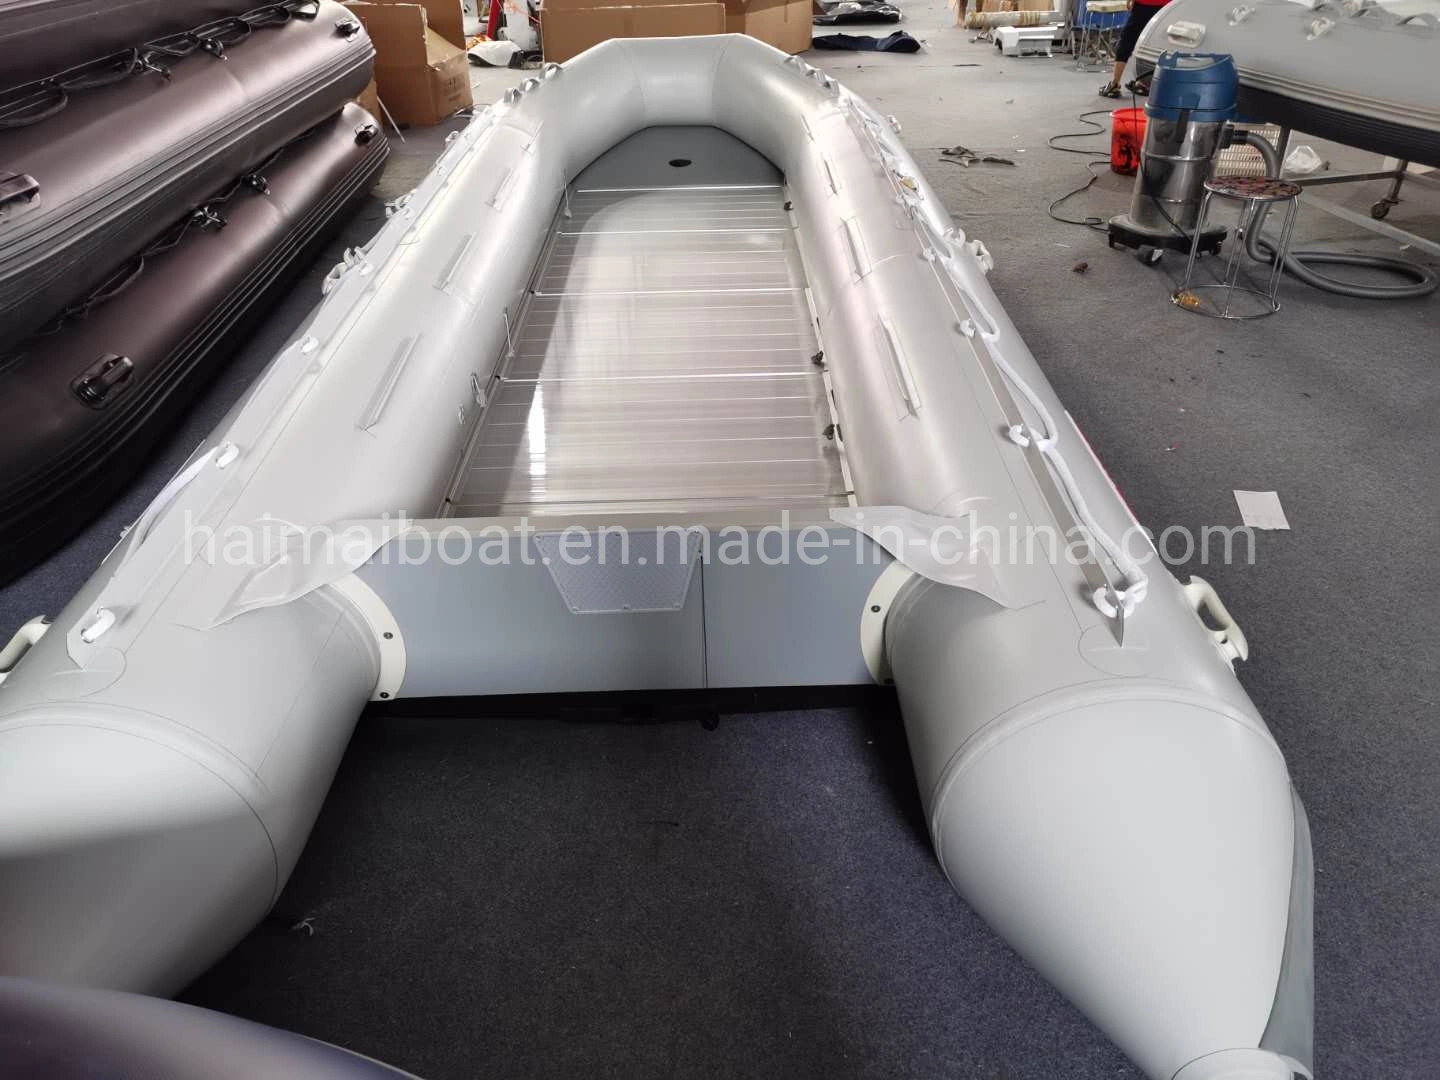 China Boat Manufacturer 19.6FT 6m Water Sports Product Hypalon Inflatable Boat Line Fishing Boat Marine Rescue Boat Tender Boat Panga Boat Patrol Boat with Ce